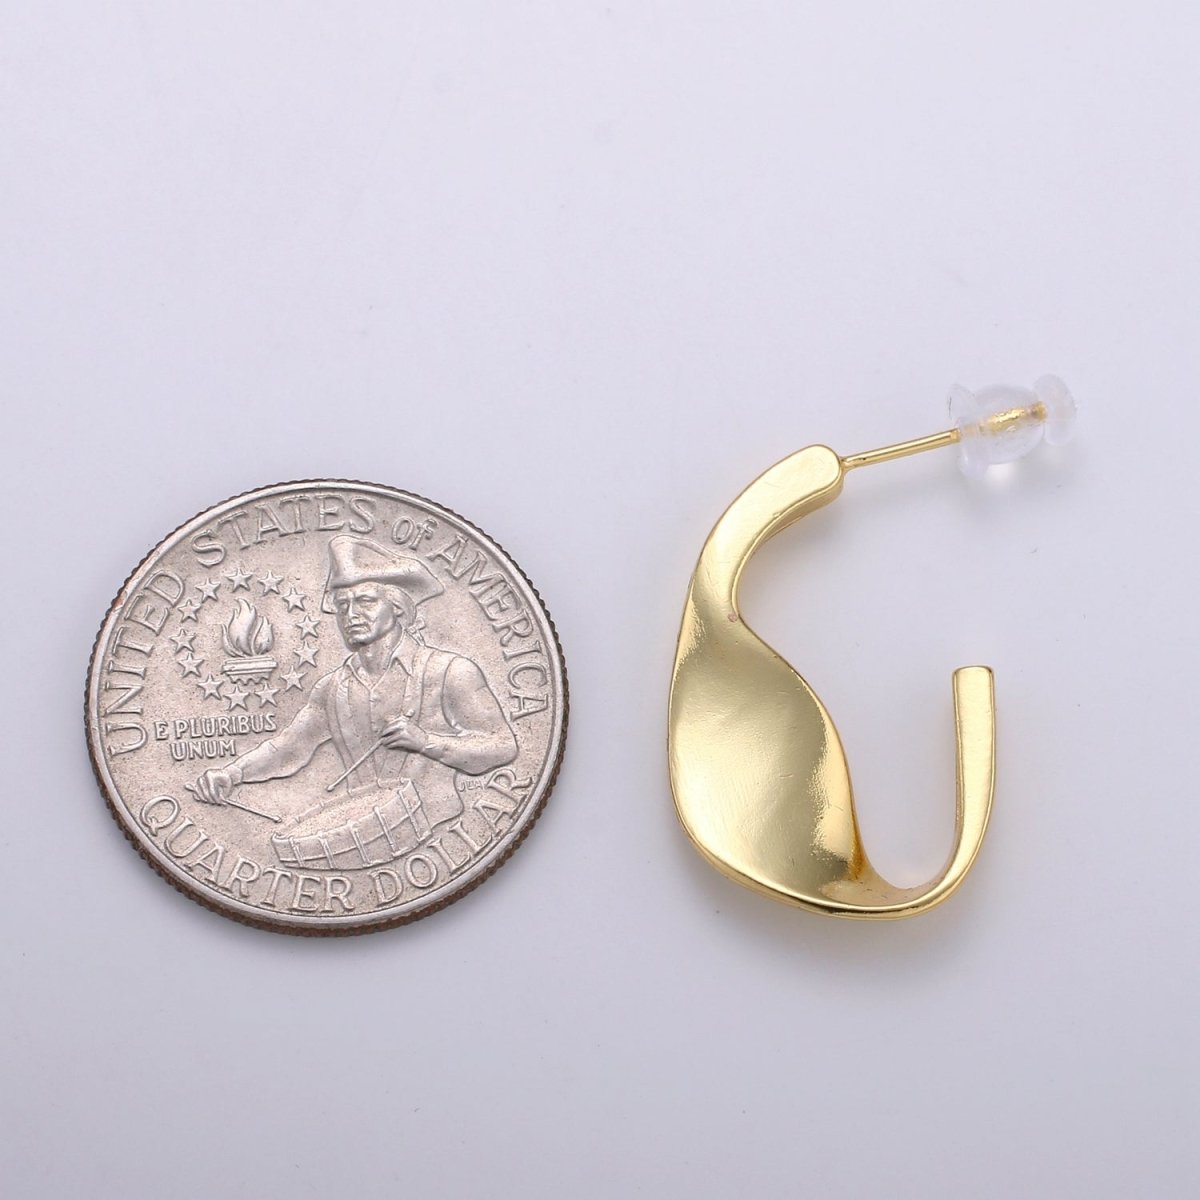 24.5 mm Plead Hook Hoops 14K Gold Plated, Weavy Gold Earrings for DIY Earring Craft Supply Jewelry Making Q-411 - DLUXCA